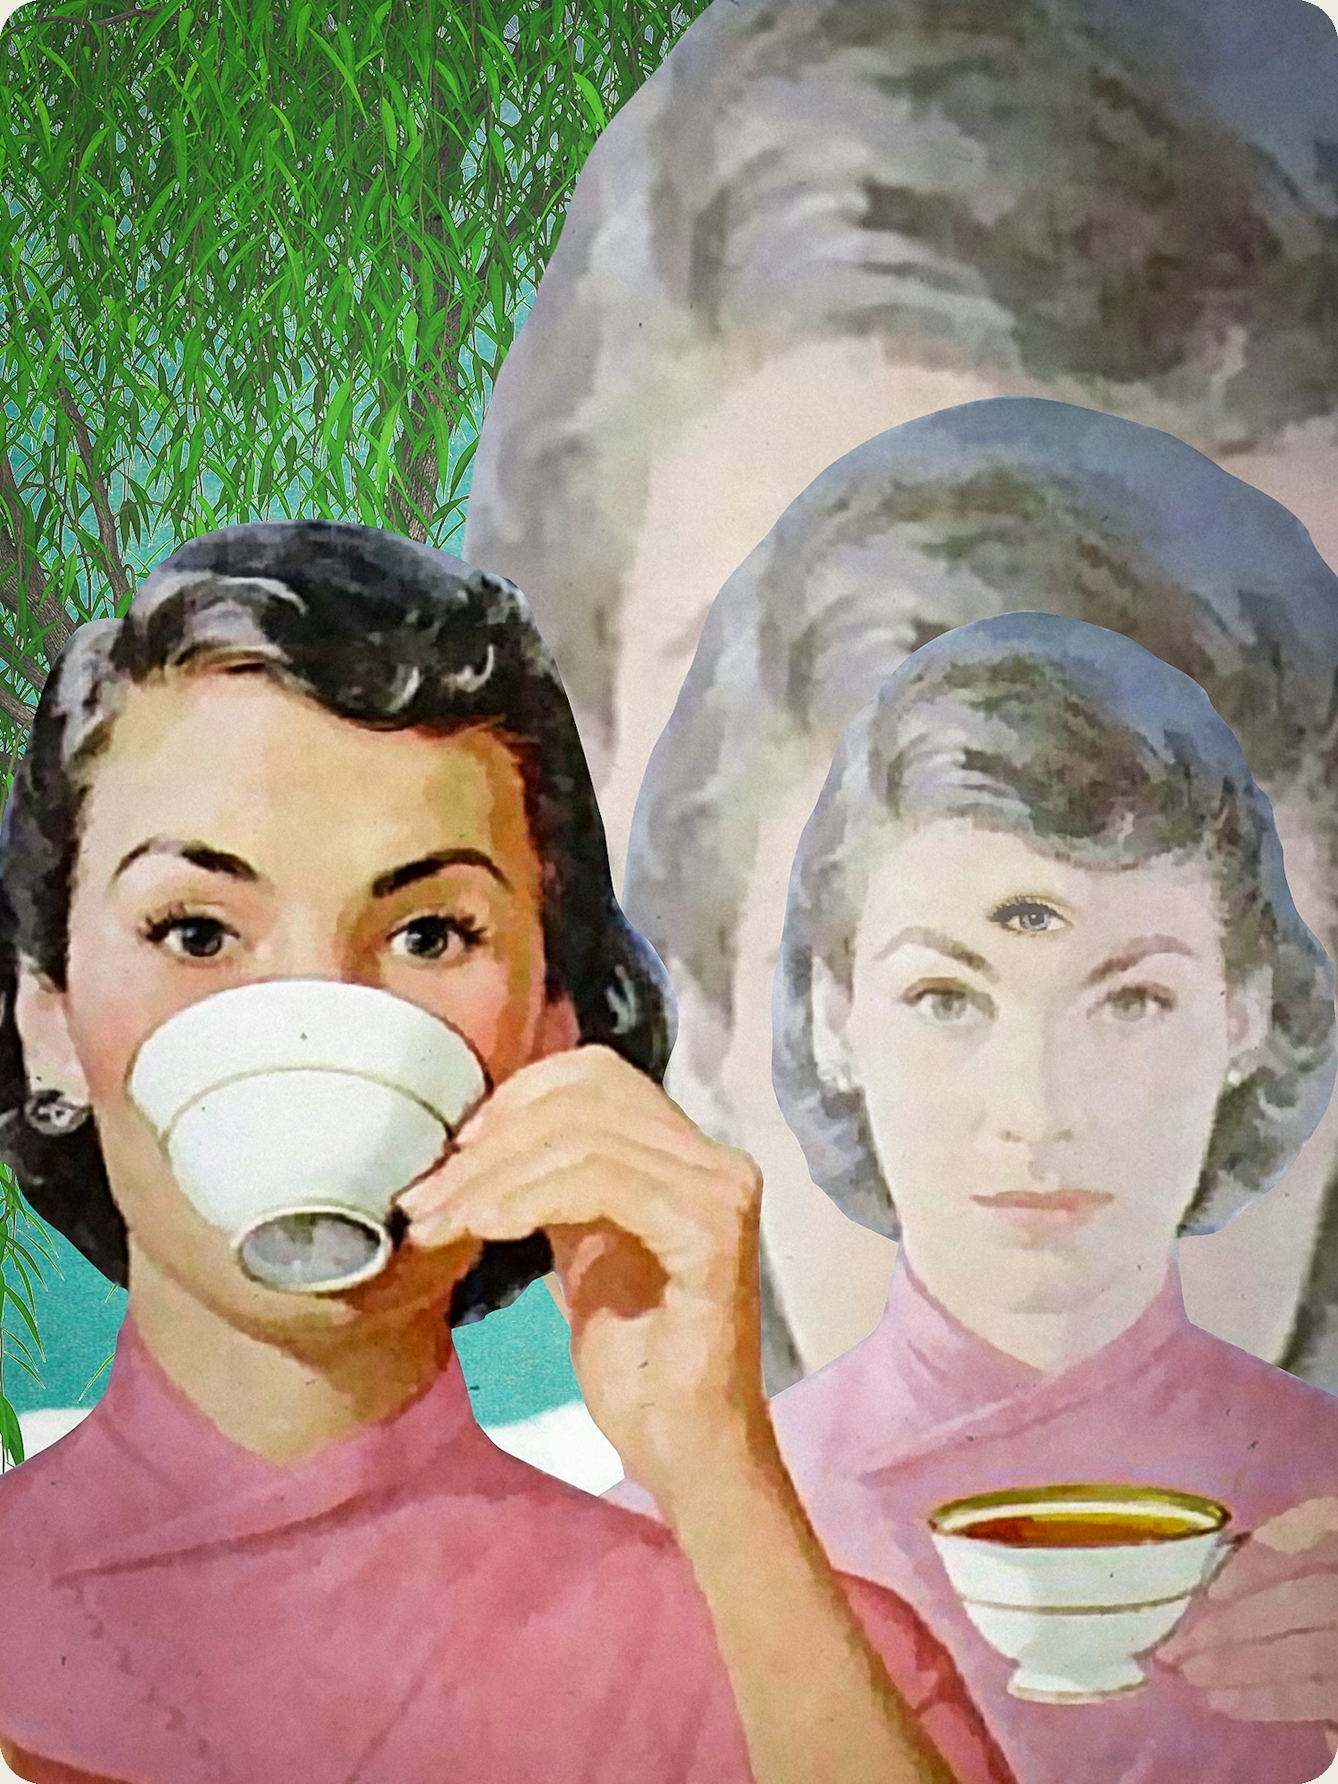 Detail from a larger mixed media digital artwork combining found imagery from vintage magazines and books with painted and textured elements. The overall hues are greens, yellows and pinks. At the centre of the artwork is a woman with short black hair wearing a red/pink Kimono. She is pictured from the shoulders up. In her left raised hand is a white china teacup which is raised to her lips. To the right again, the a duplicate of the woman is reduced in tone and scale and looking towards the viewer with a neutral expression, teacup I hand. In the centre of her forehead is an extra eye. Behind this figure, two further duplications disappear into the distance behind her, increasing in scale. 